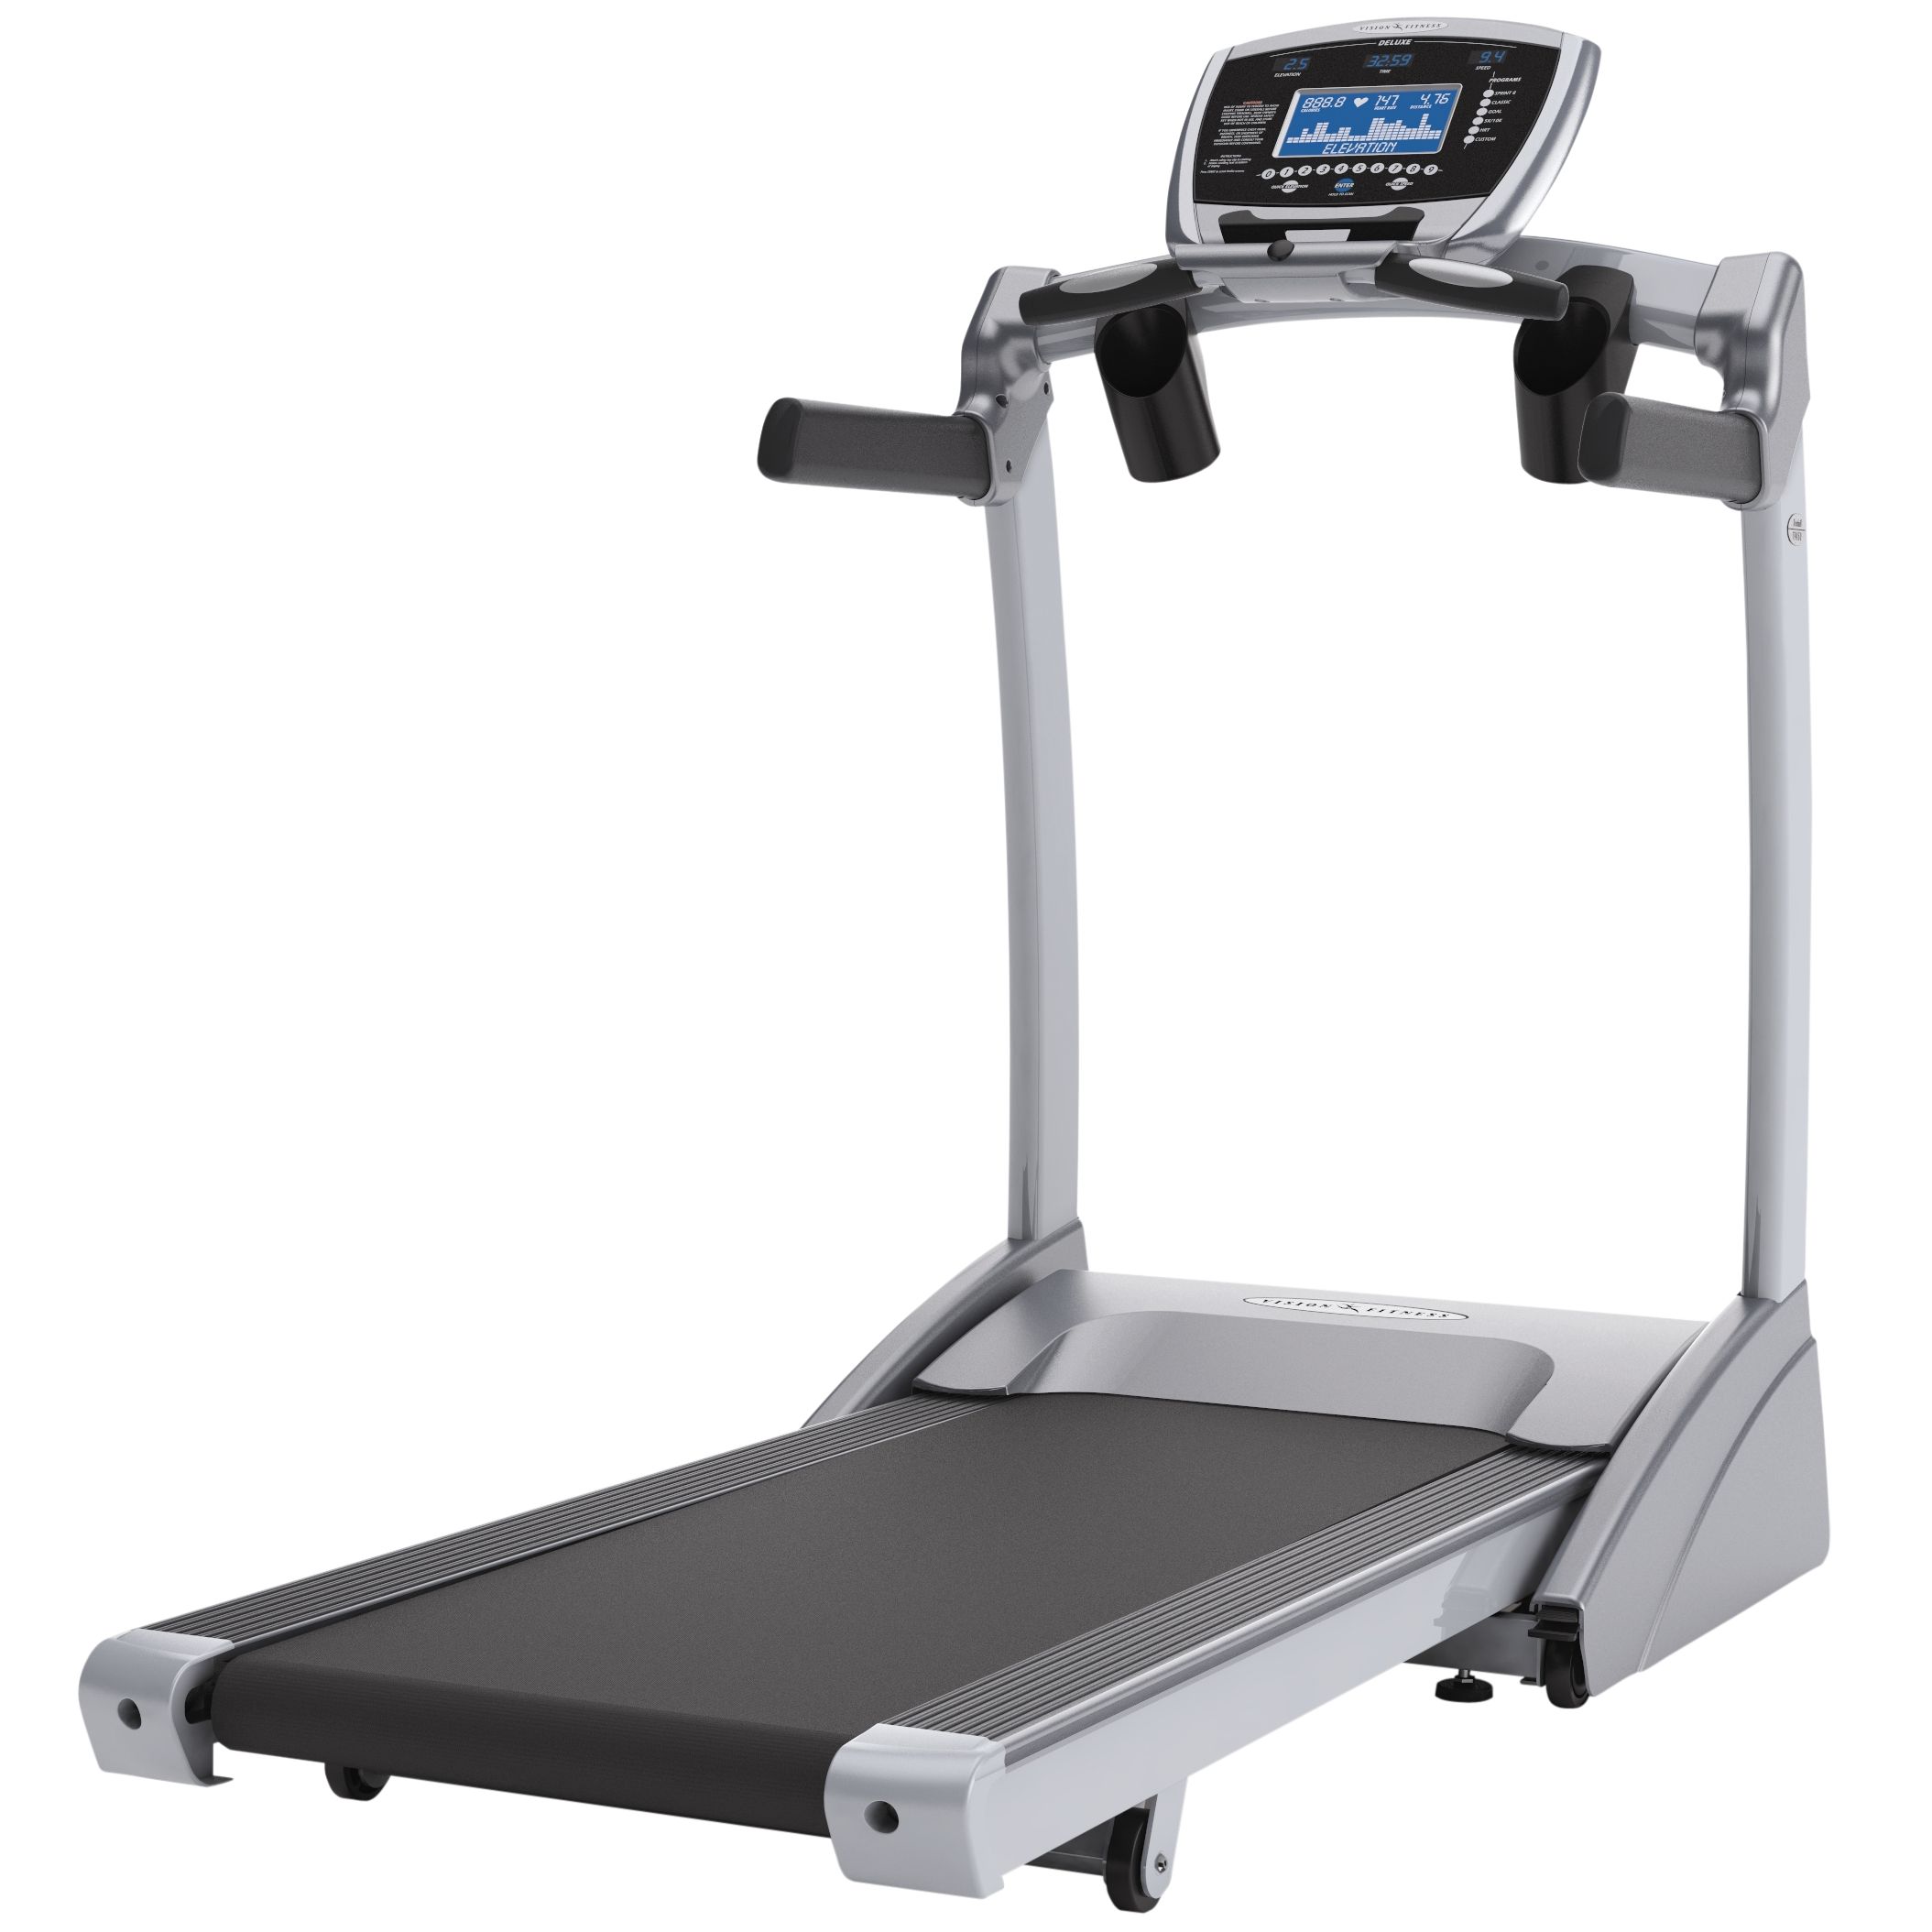 Vision Fitness T9550HRT Folding Treadmill with Deluxe Console at JohnLewis